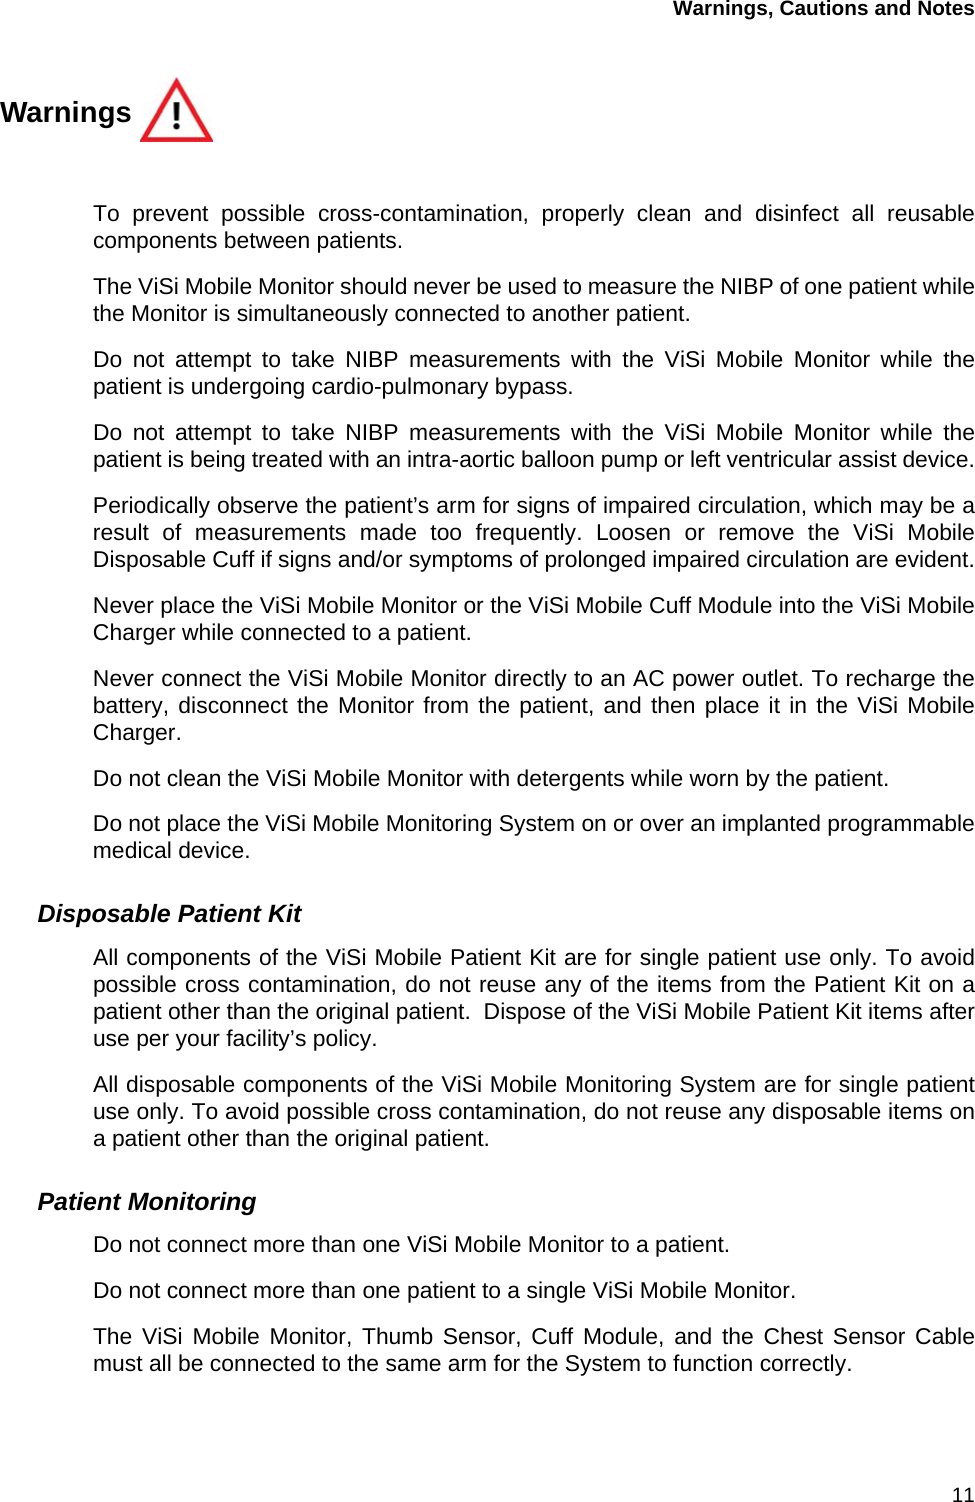 Warnings, Cautions and Notes11Warnings To prevent possible cross-contamination, properly clean and disinfect all reusablecomponents between patients.The ViSi Mobile Monitor should never be used to measure the NIBP of one patient whilethe Monitor is simultaneously connected to another patient.Do not attempt to take NIBP measurements with the ViSi Mobile Monitor while thepatient is undergoing cardio-pulmonary bypass.Do not attempt to take NIBP measurements with the ViSi Mobile Monitor while thepatient is being treated with an intra-aortic balloon pump or left ventricular assist device.Periodically observe the patient’s arm for signs of impaired circulation, which may be aresult of measurements made too frequently. Loosen or remove the ViSi MobileDisposable Cuff if signs and/or symptoms of prolonged impaired circulation are evident.Never place the ViSi Mobile Monitor or the ViSi Mobile Cuff Module into the ViSi MobileCharger while connected to a patient.Never connect the ViSi Mobile Monitor directly to an AC power outlet. To recharge thebattery, disconnect the Monitor from the patient, and then place it in the ViSi MobileCharger.Do not clean the ViSi Mobile Monitor with detergents while worn by the patient.Do not place the ViSi Mobile Monitoring System on or over an implanted programmablemedical device.Disposable Patient KitAll components of the ViSi Mobile Patient Kit are for single patient use only. To avoidpossible cross contamination, do not reuse any of the items from the Patient Kit on apatient other than the original patient.  Dispose of the ViSi Mobile Patient Kit items afteruse per your facility’s policy.All disposable components of the ViSi Mobile Monitoring System are for single patientuse only. To avoid possible cross contamination, do not reuse any disposable items ona patient other than the original patient.Patient MonitoringDo not connect more than one ViSi Mobile Monitor to a patient.Do not connect more than one patient to a single ViSi Mobile Monitor.The ViSi Mobile Monitor, Thumb Sensor, Cuff Module, and the Chest Sensor Cablemust all be connected to the same arm for the System to function correctly.